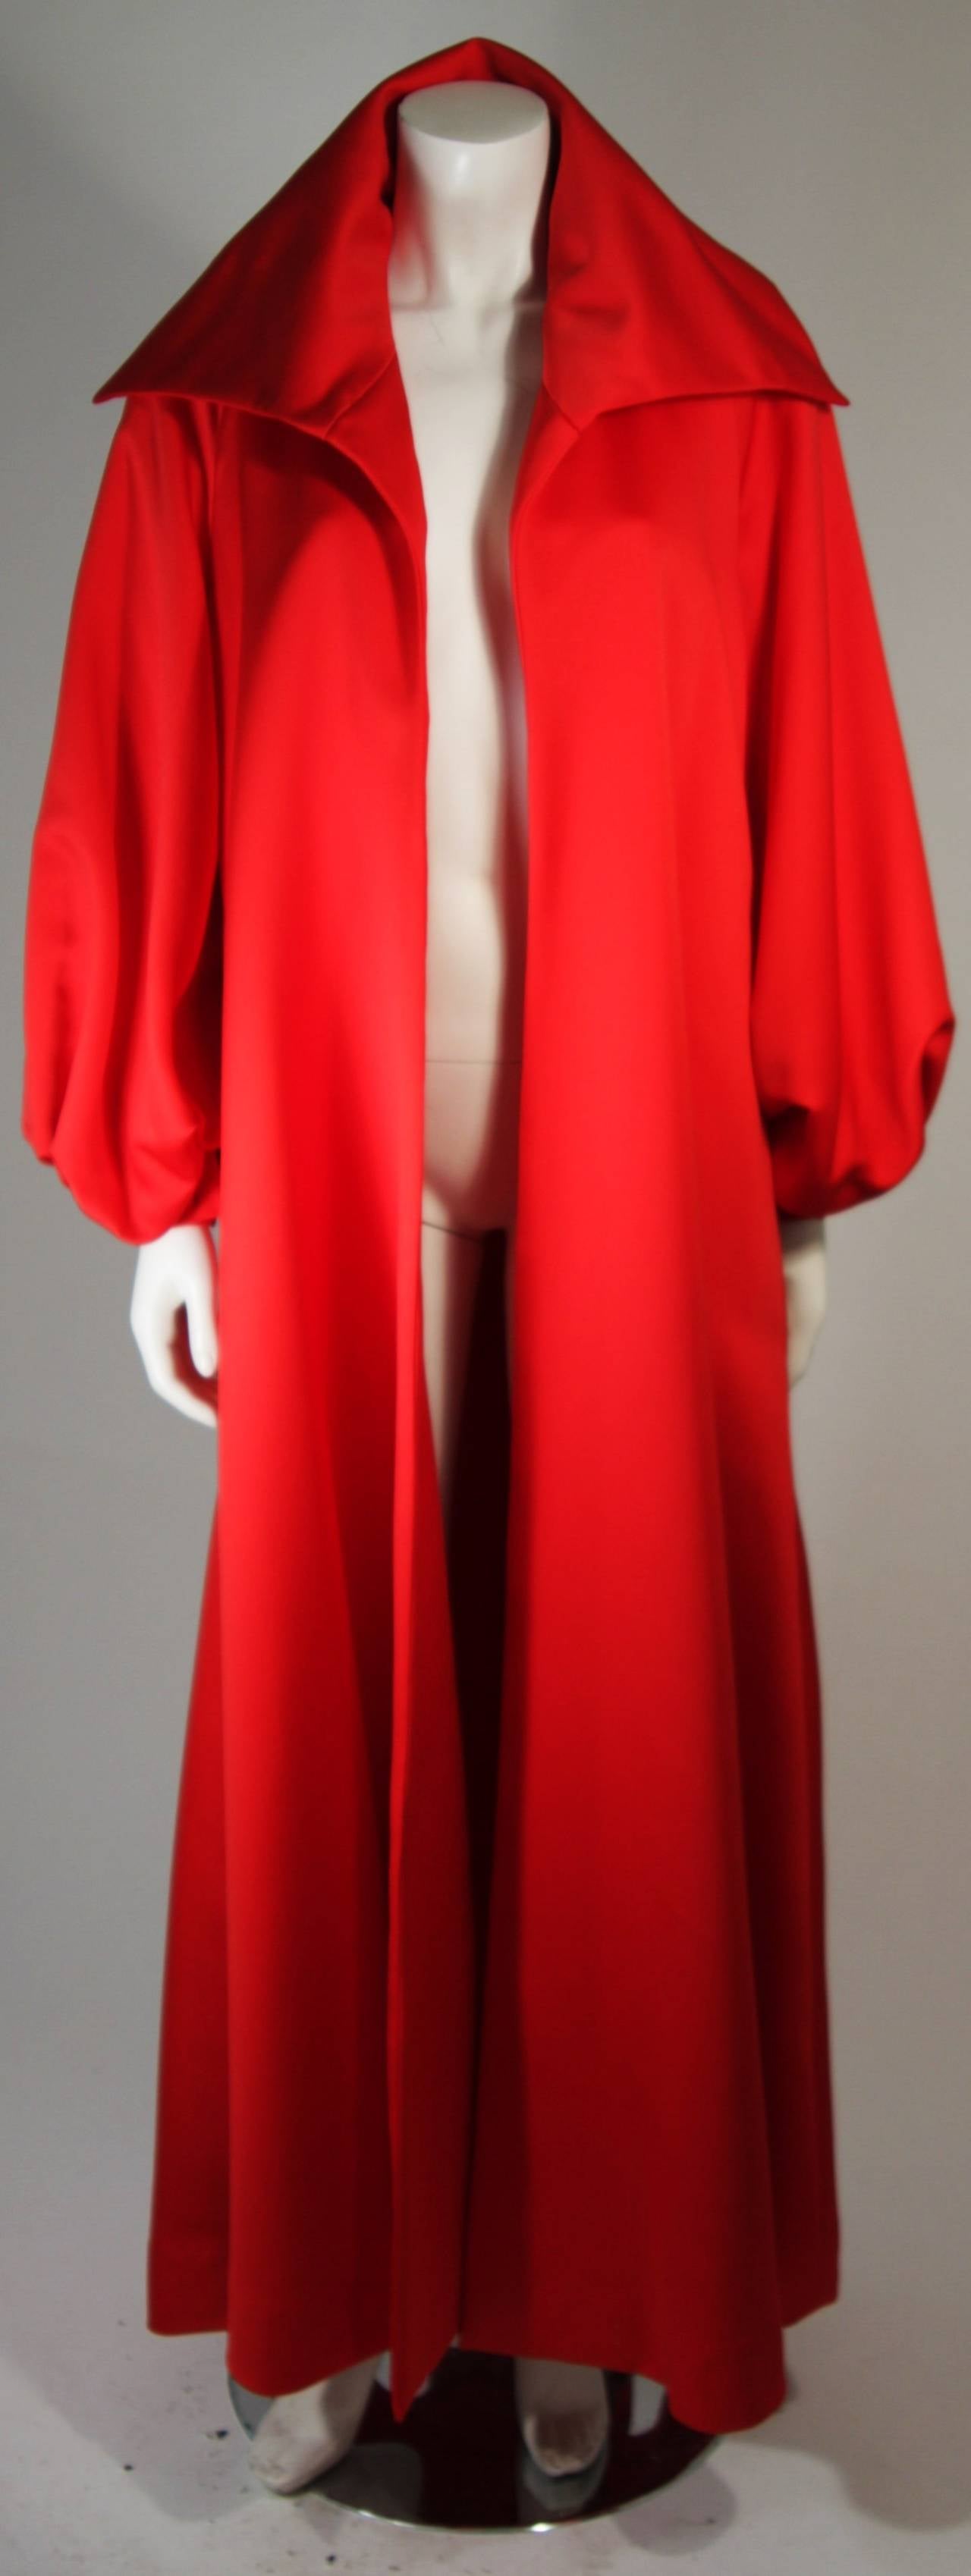 This Victor Costa design is available for viewing at our Beverly Hills Boutique. We offer a large selection of evening gowns and luxury garments.

This coat is composed of a rich red satin which is accented by a dramatic collar and sleeve design.